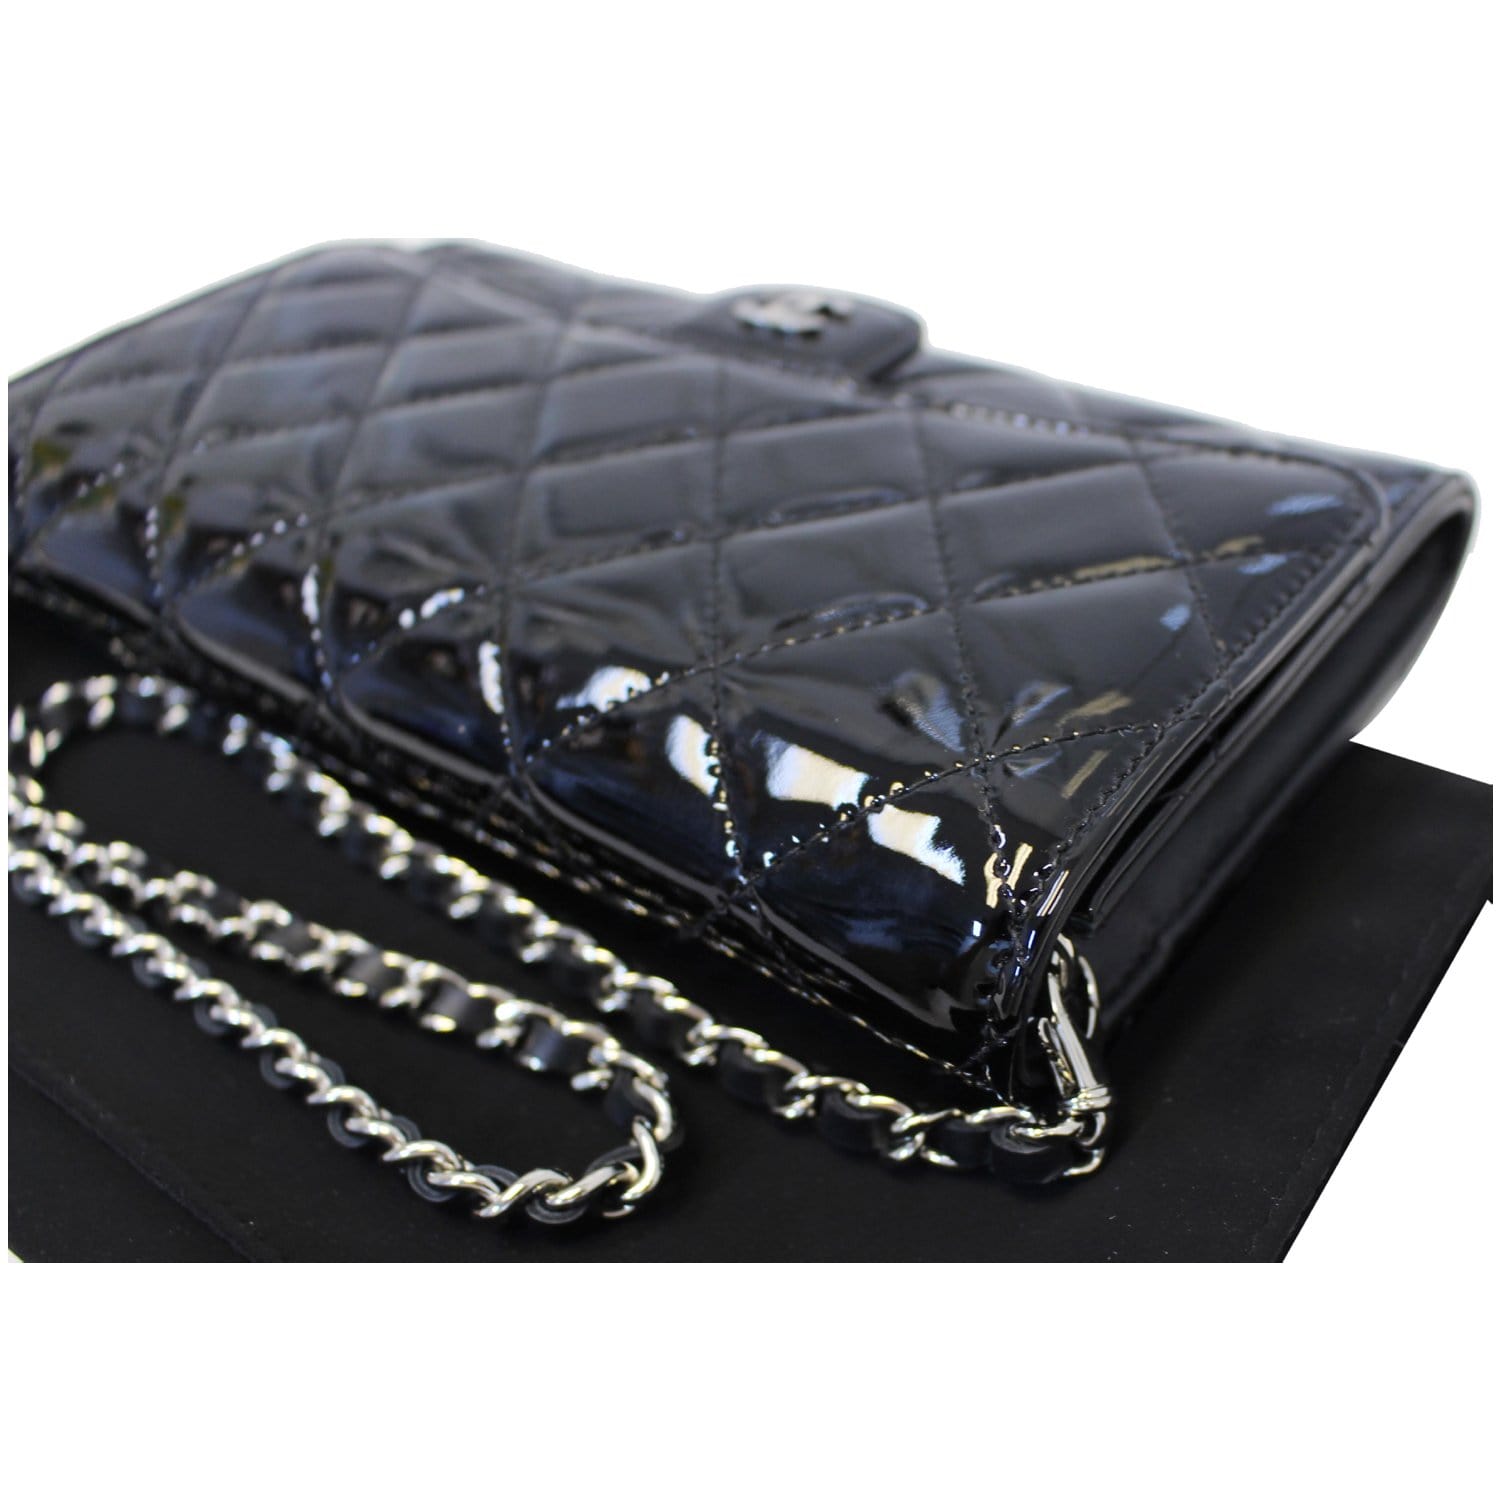 A BLACK PATENT LEATHER WALLET ON CHAIN FLAP BAG, CHANEL, 2008-09